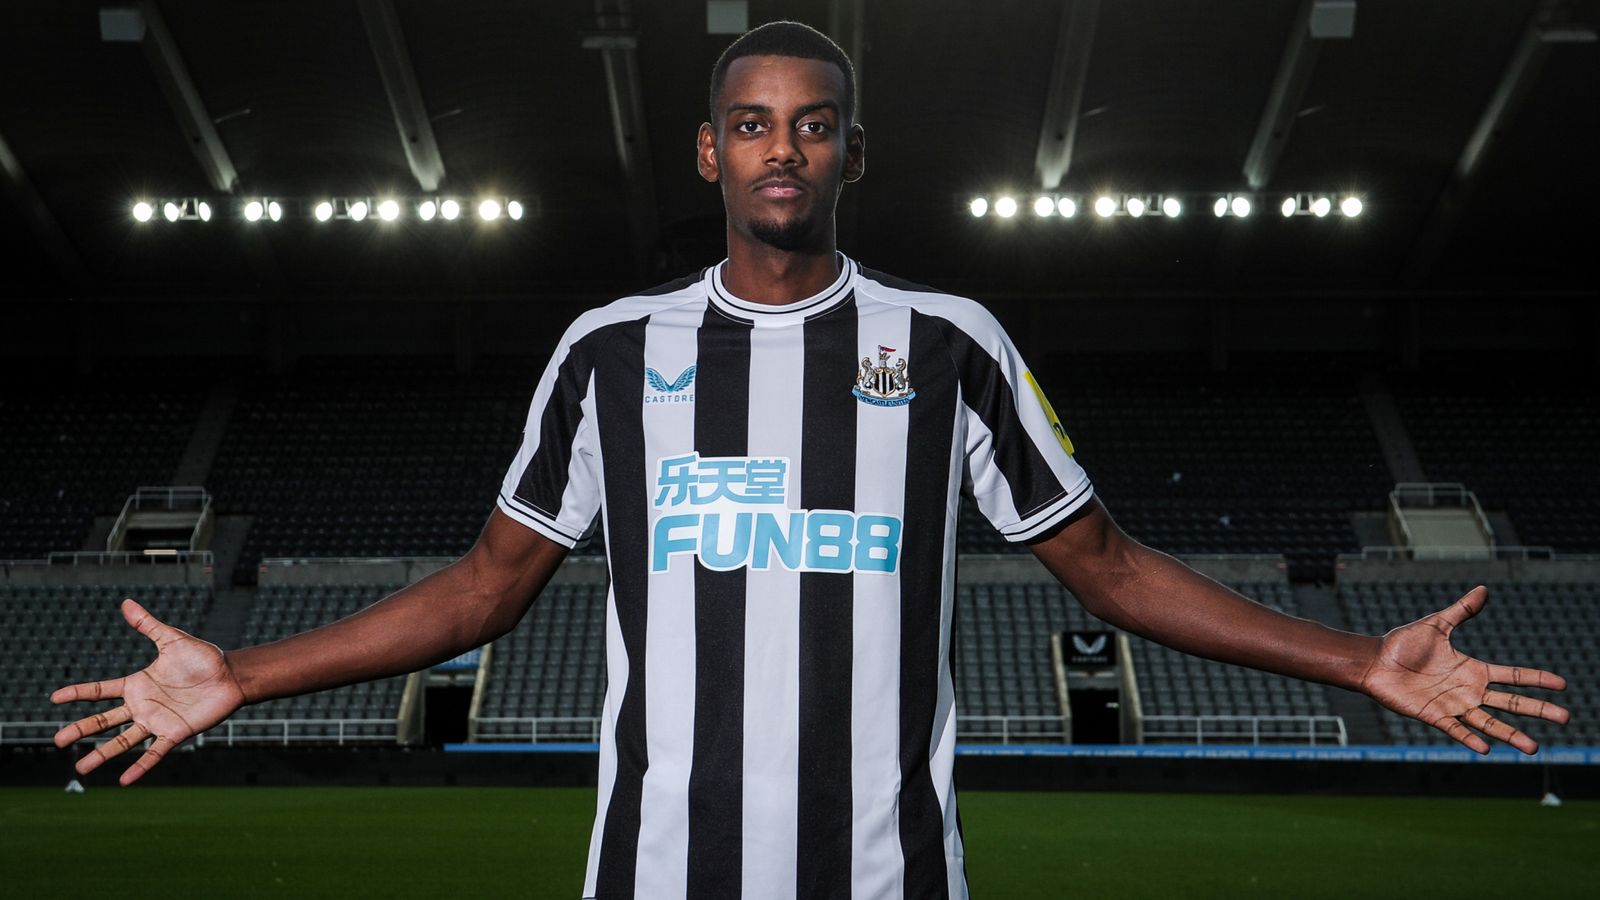  A photo of Alexander Isak, a Swedish professional footballer who plays as a striker for Premier League club Newcastle United, posing in a black and white striped shirt with his arms outstretched.